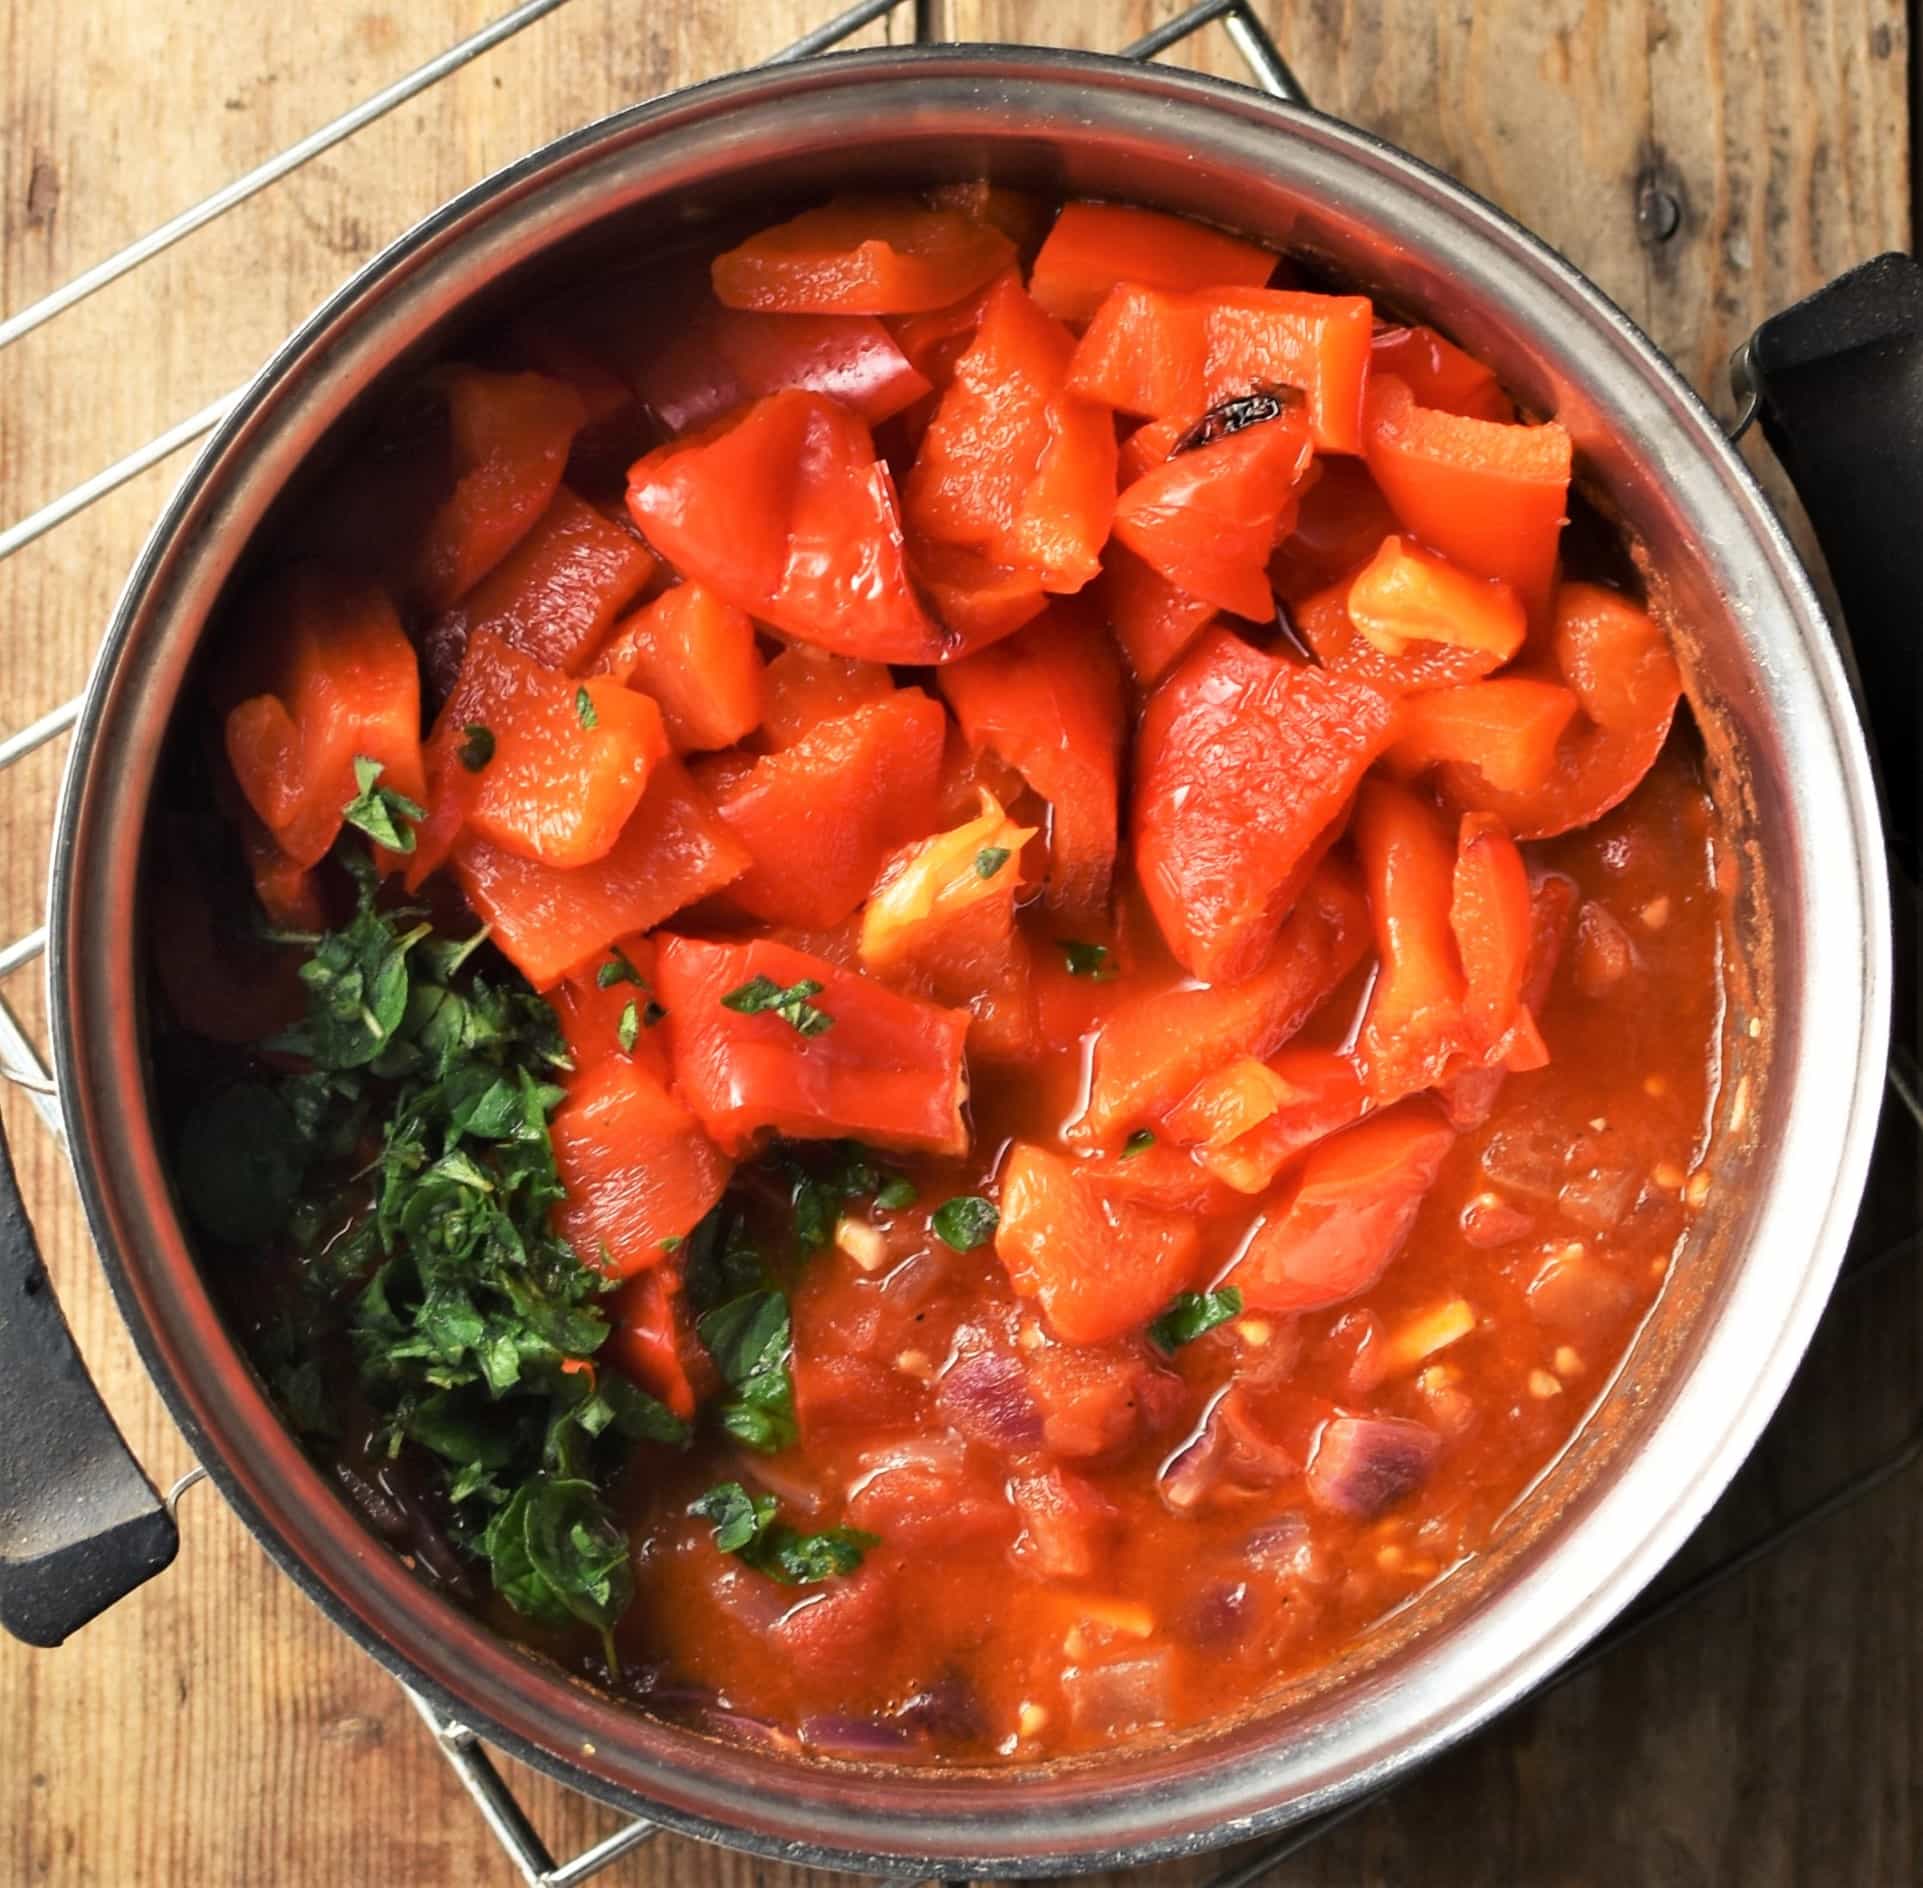 Chopped red peppers, tomato sauce and herbs in pot.